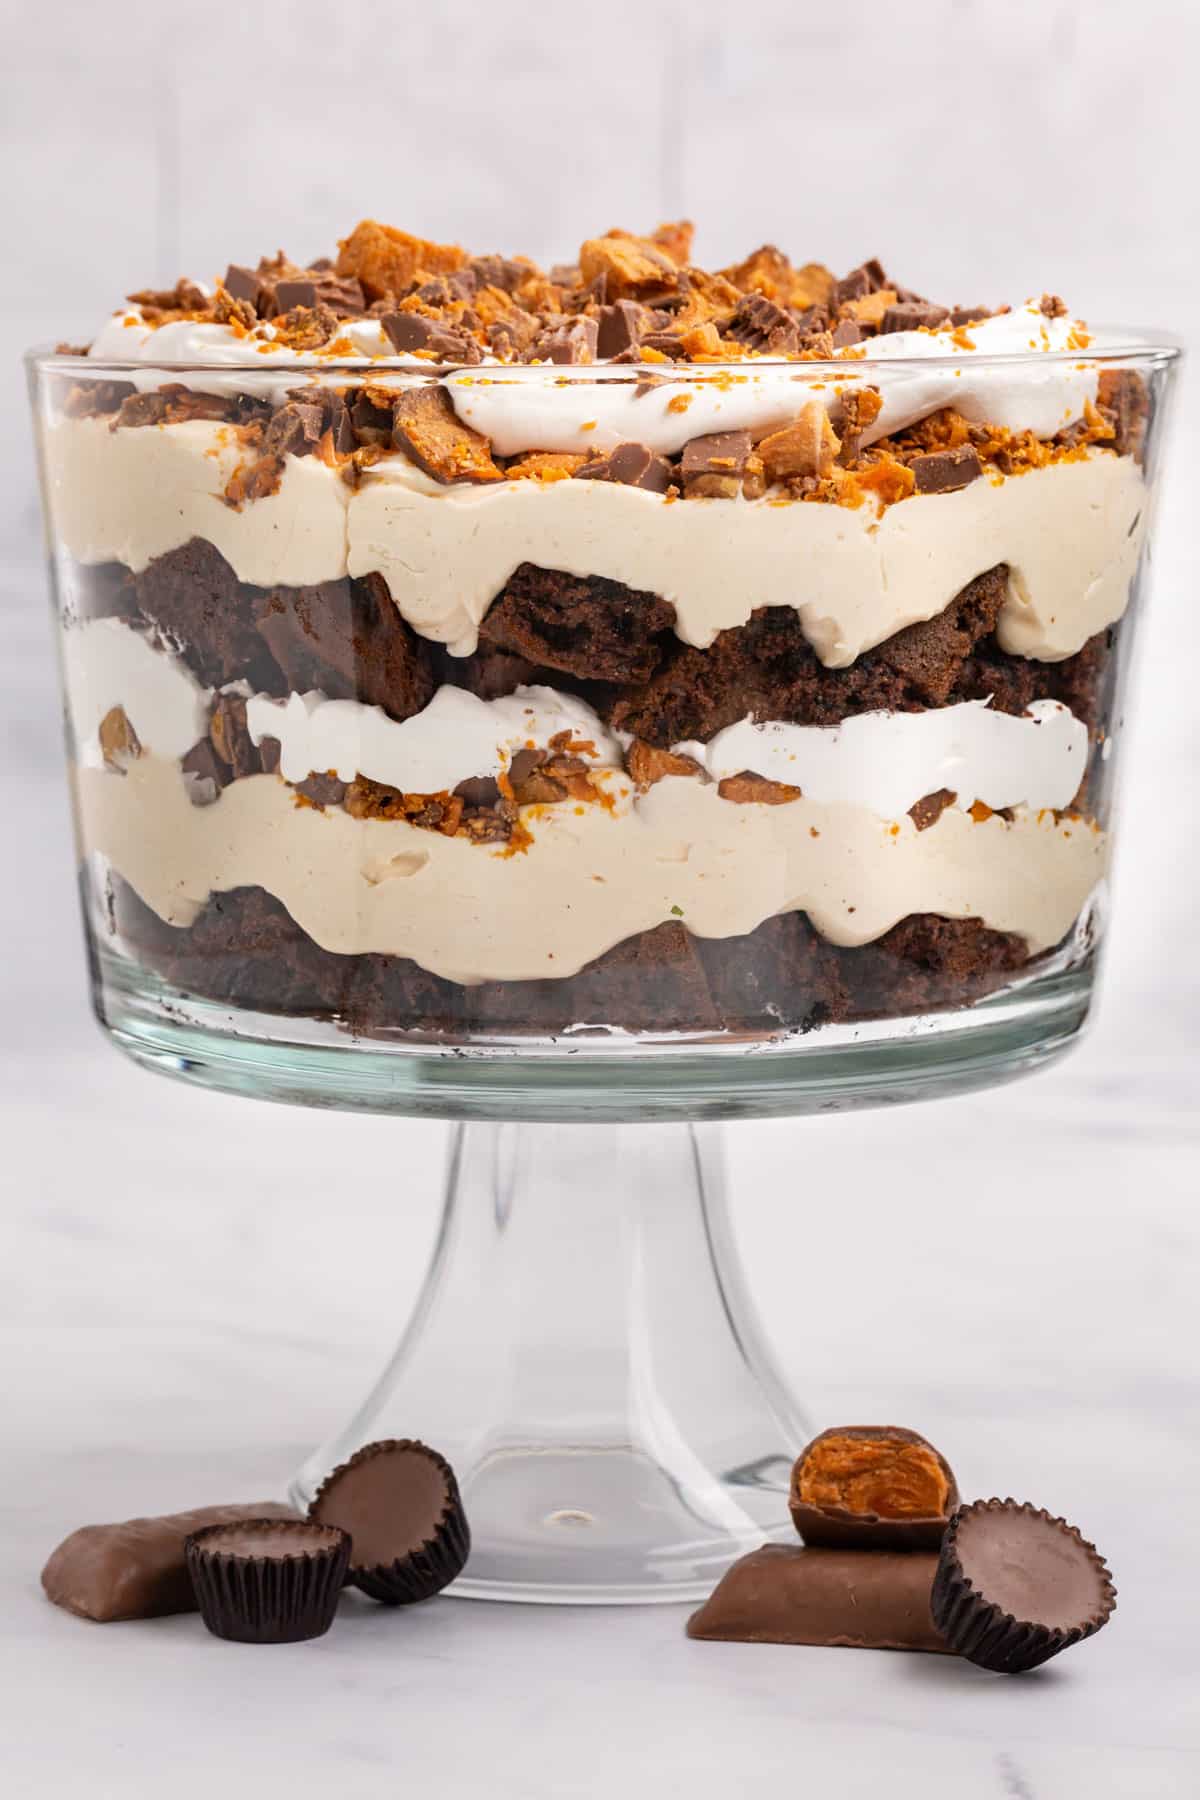 reese's peanut butter cup trifle with oreo cake